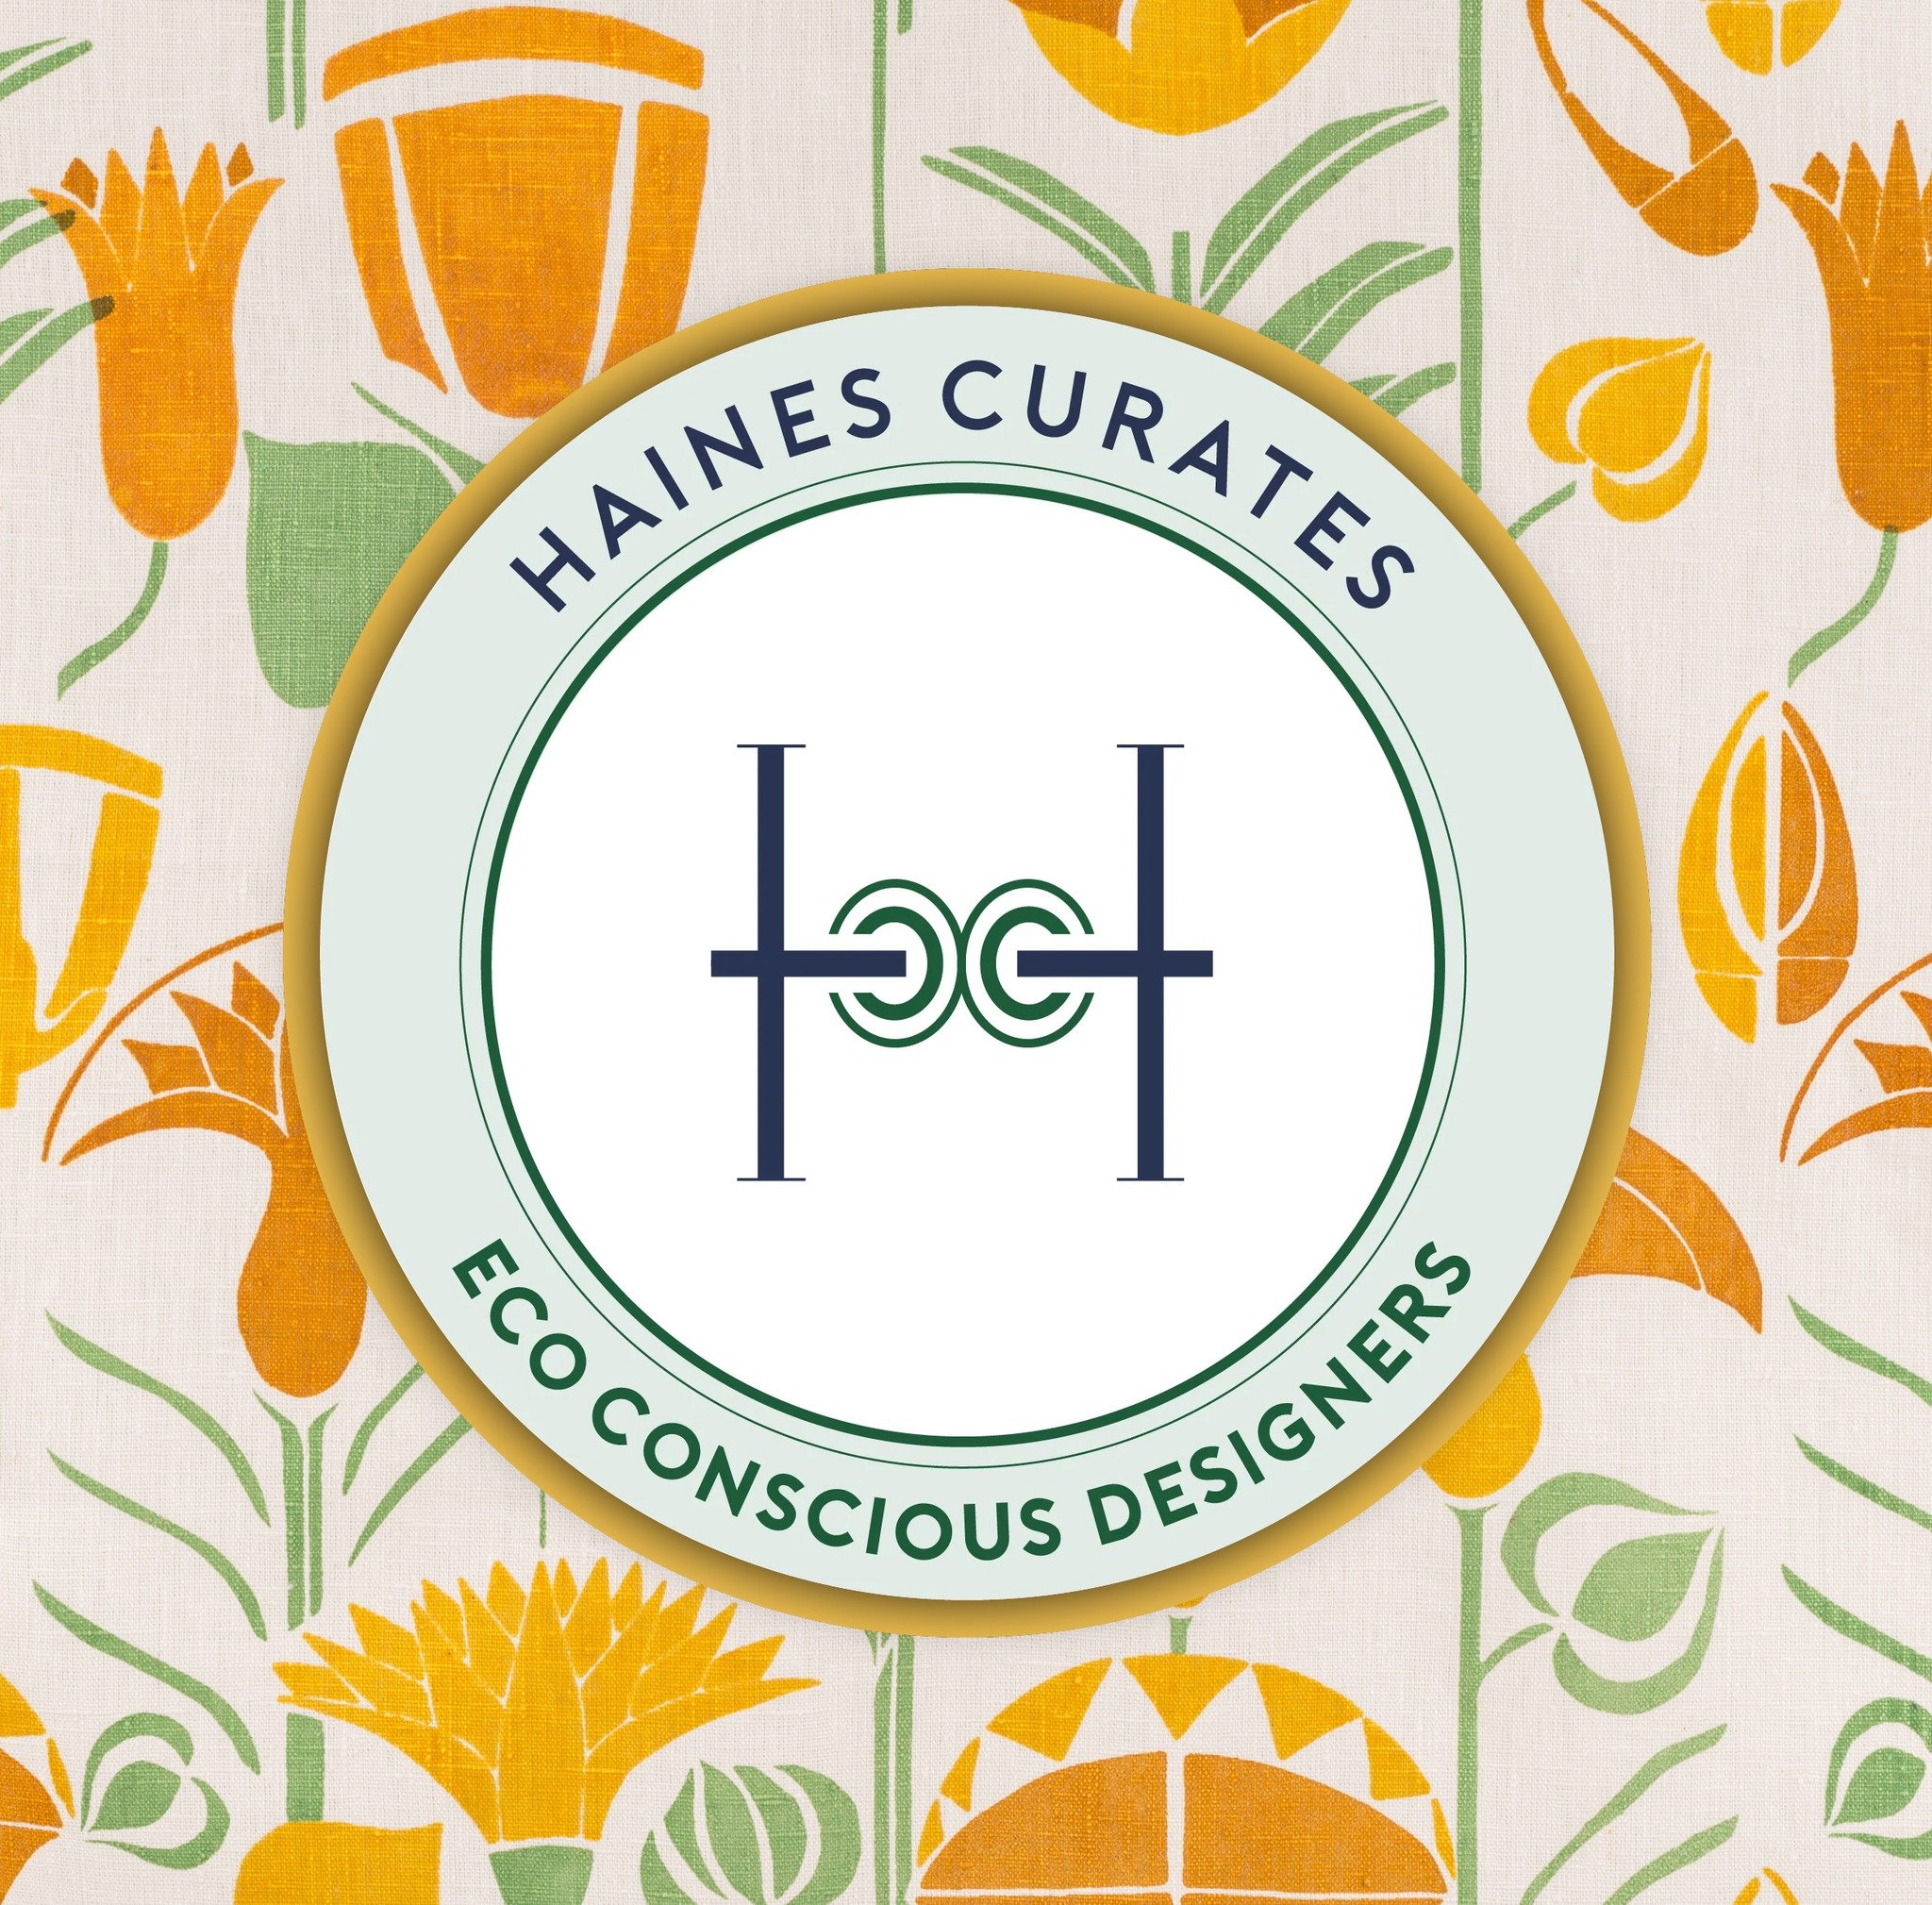 We are thrilled to share we are joining the Haines Curates class of 2024! @haines_collection is a very inspiring company. They have saved nearly 30,000 metres of textiles from landfill and done amazing things for the UK textiles industry. Thank you f